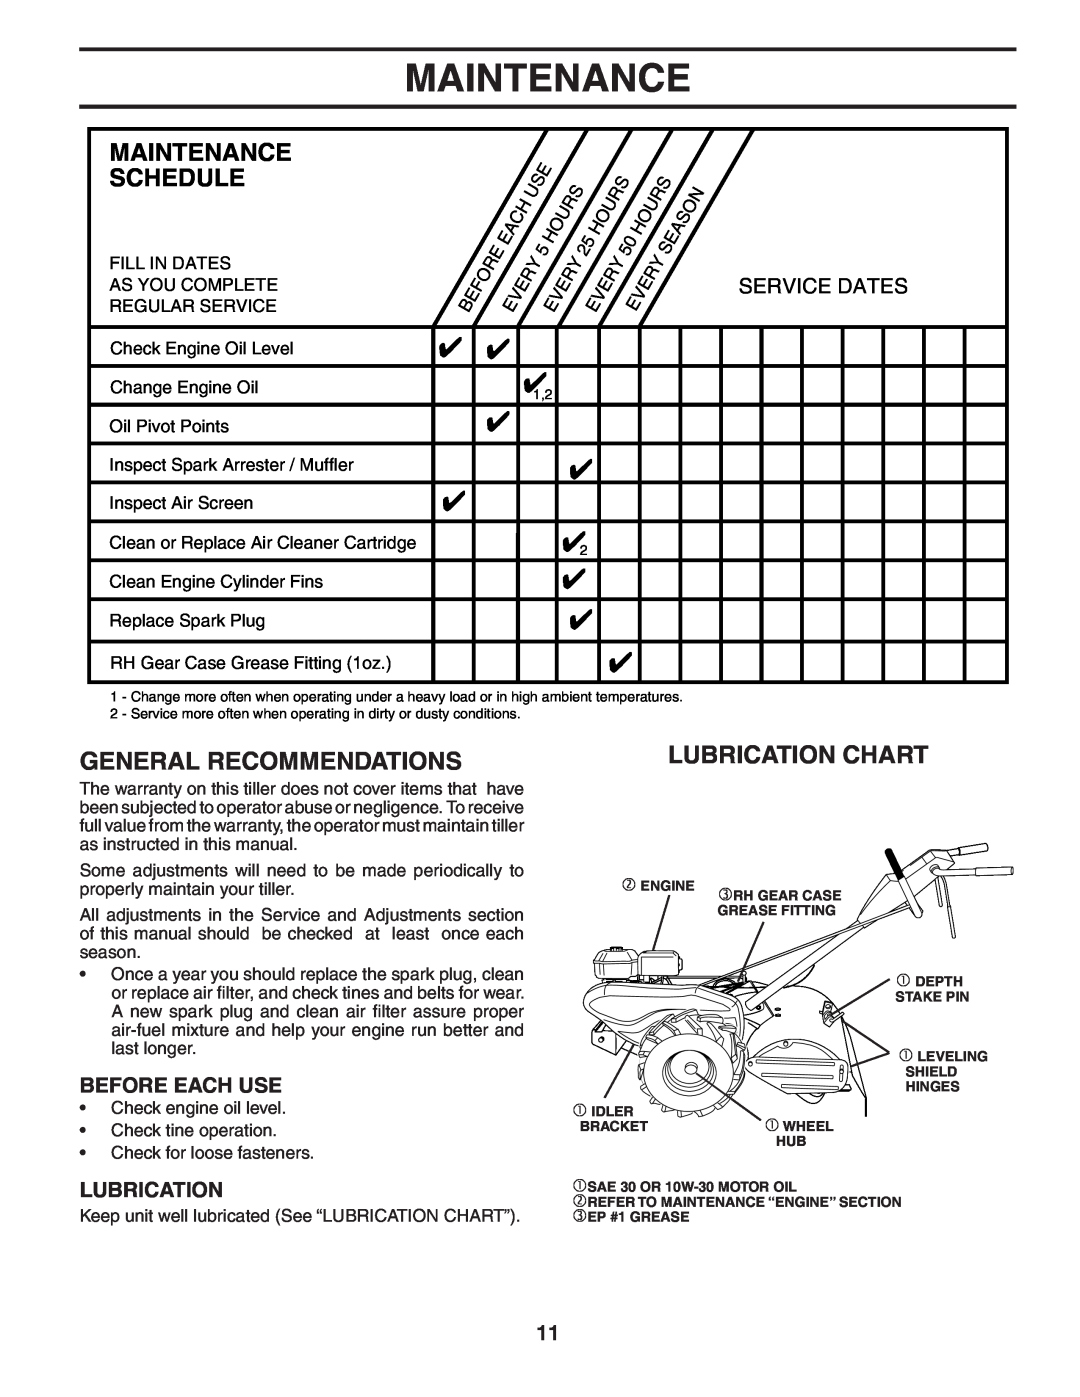 Poulan 401434 manual Maintenance, Schedule, General Recommendations, Lubrication Chart, Before Each Use, Service Dates 